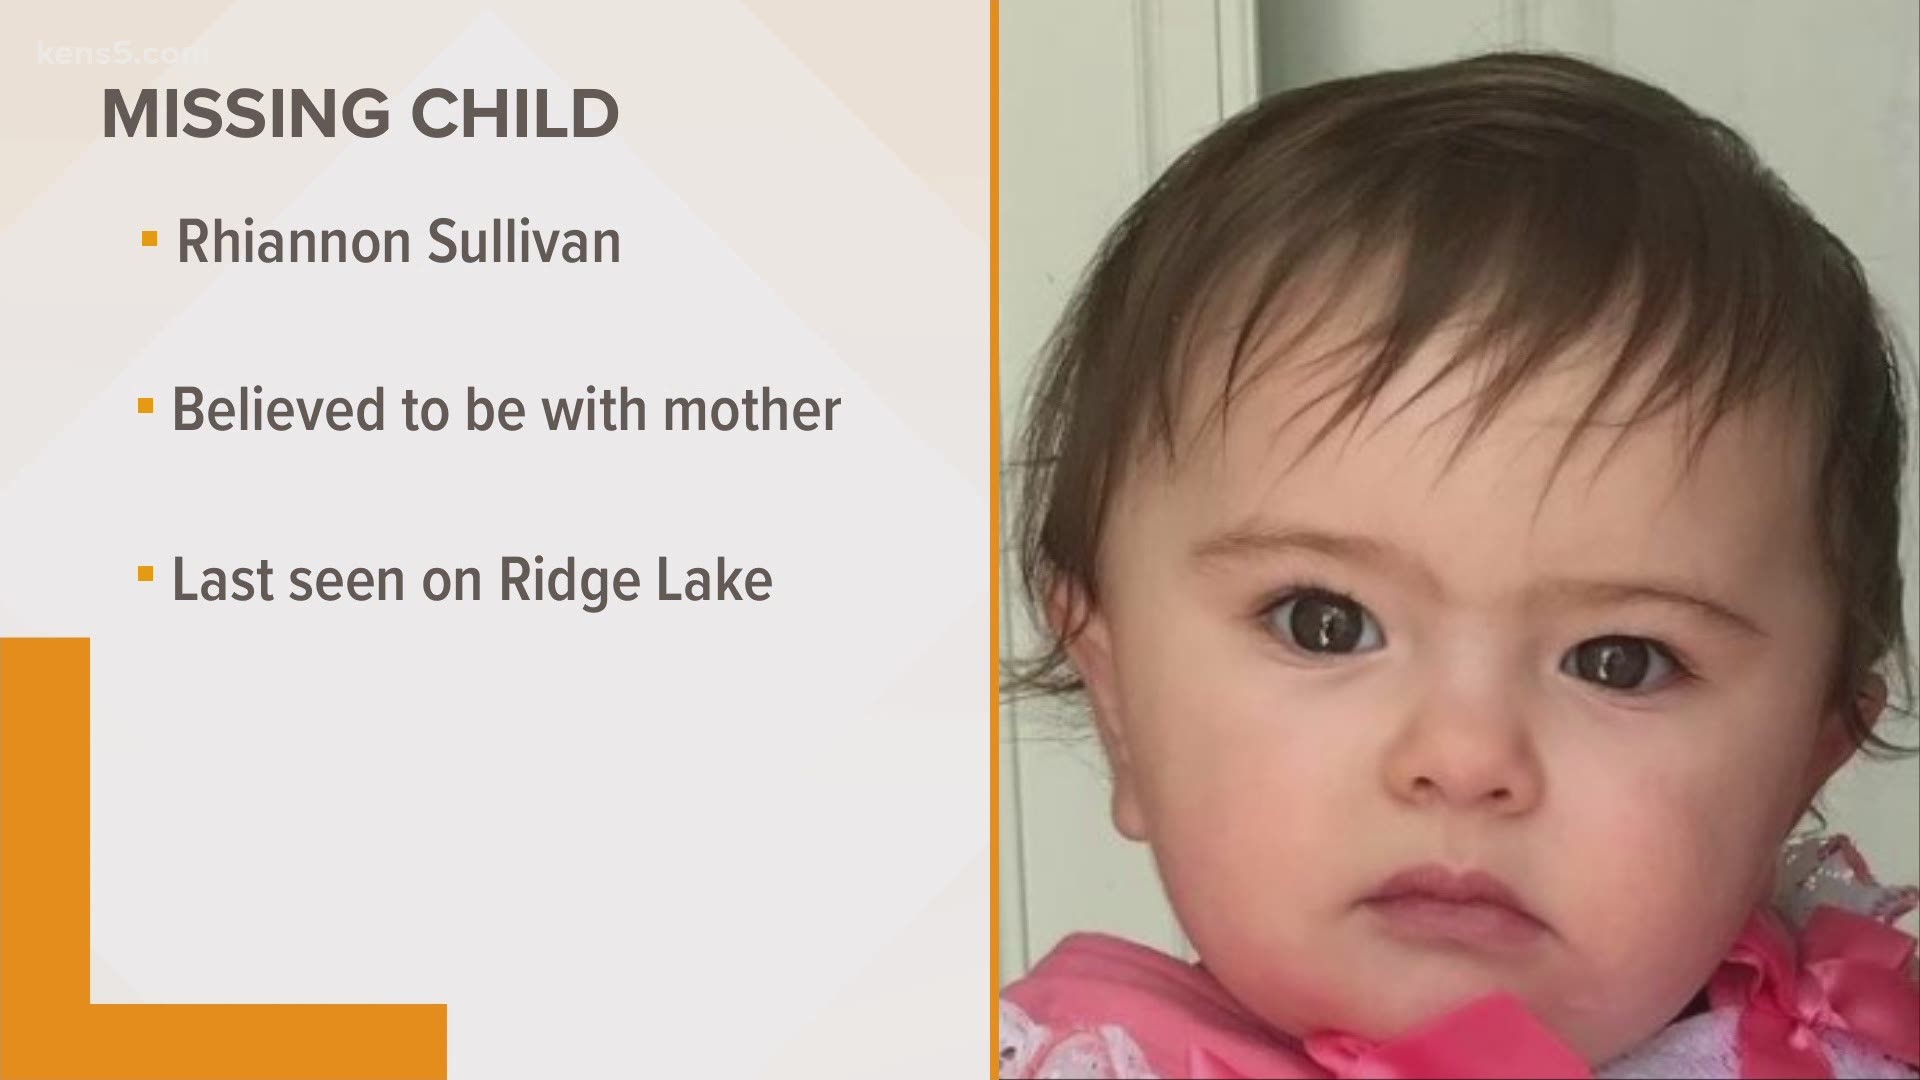 Have you seen her? The San Antonio Police Department is asking for your help finding 10-month-old Rhiannon Sullivan.